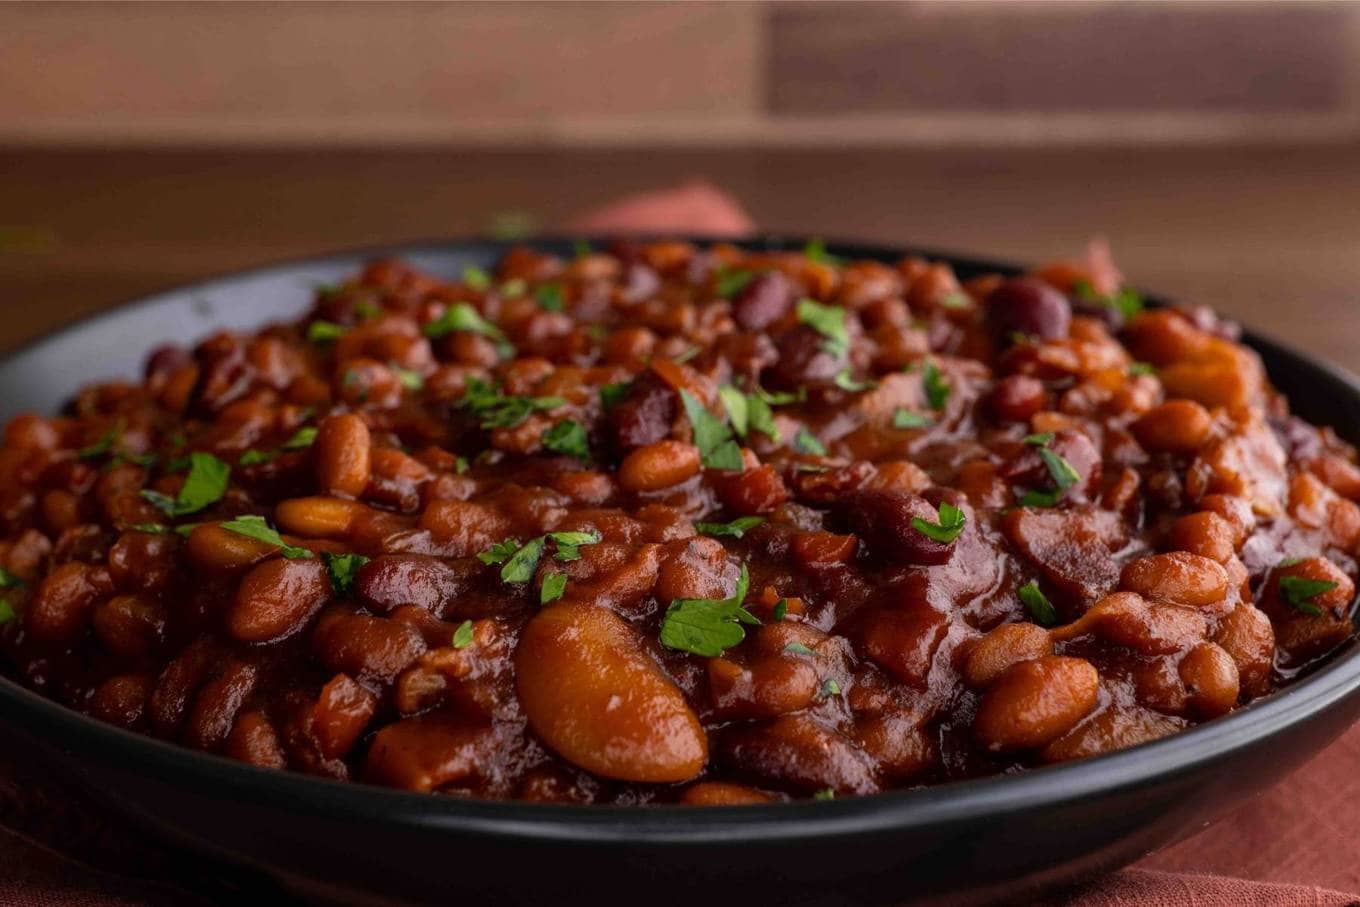 Baked Beans in serving bowl